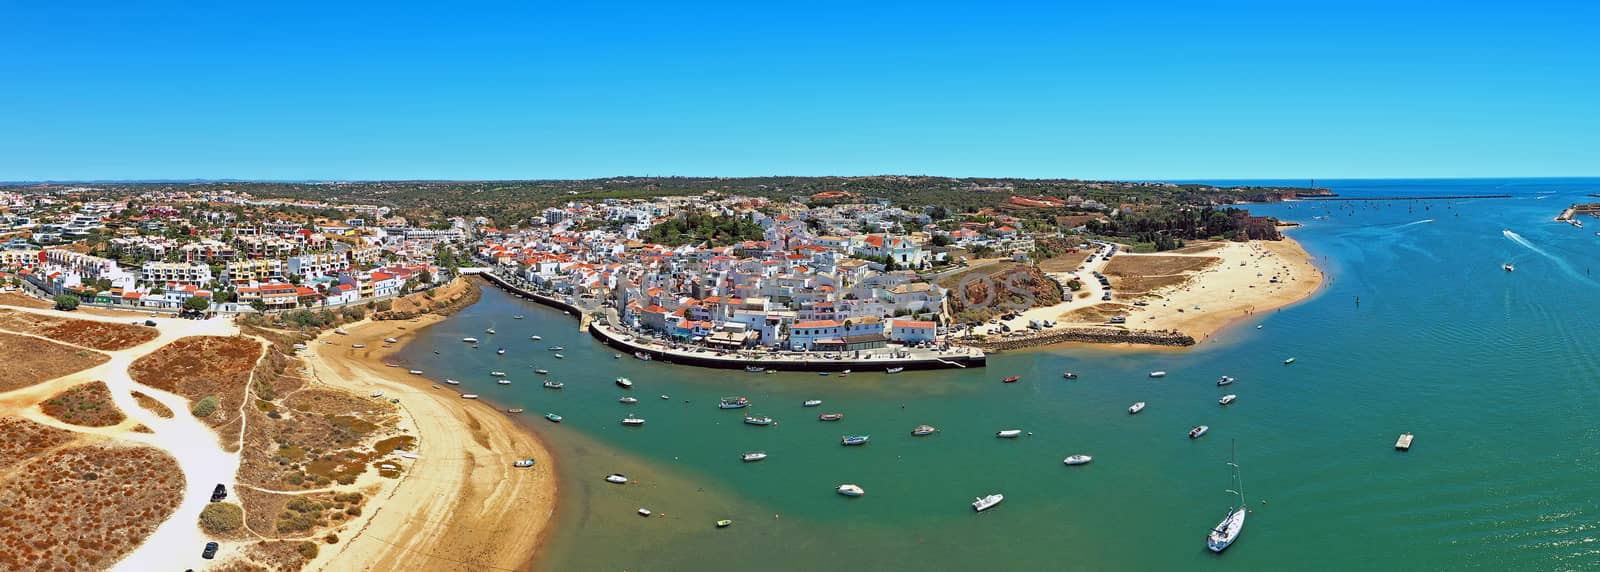 Aerial panorama from the village Ferragudo in the Algarve Portug by devy